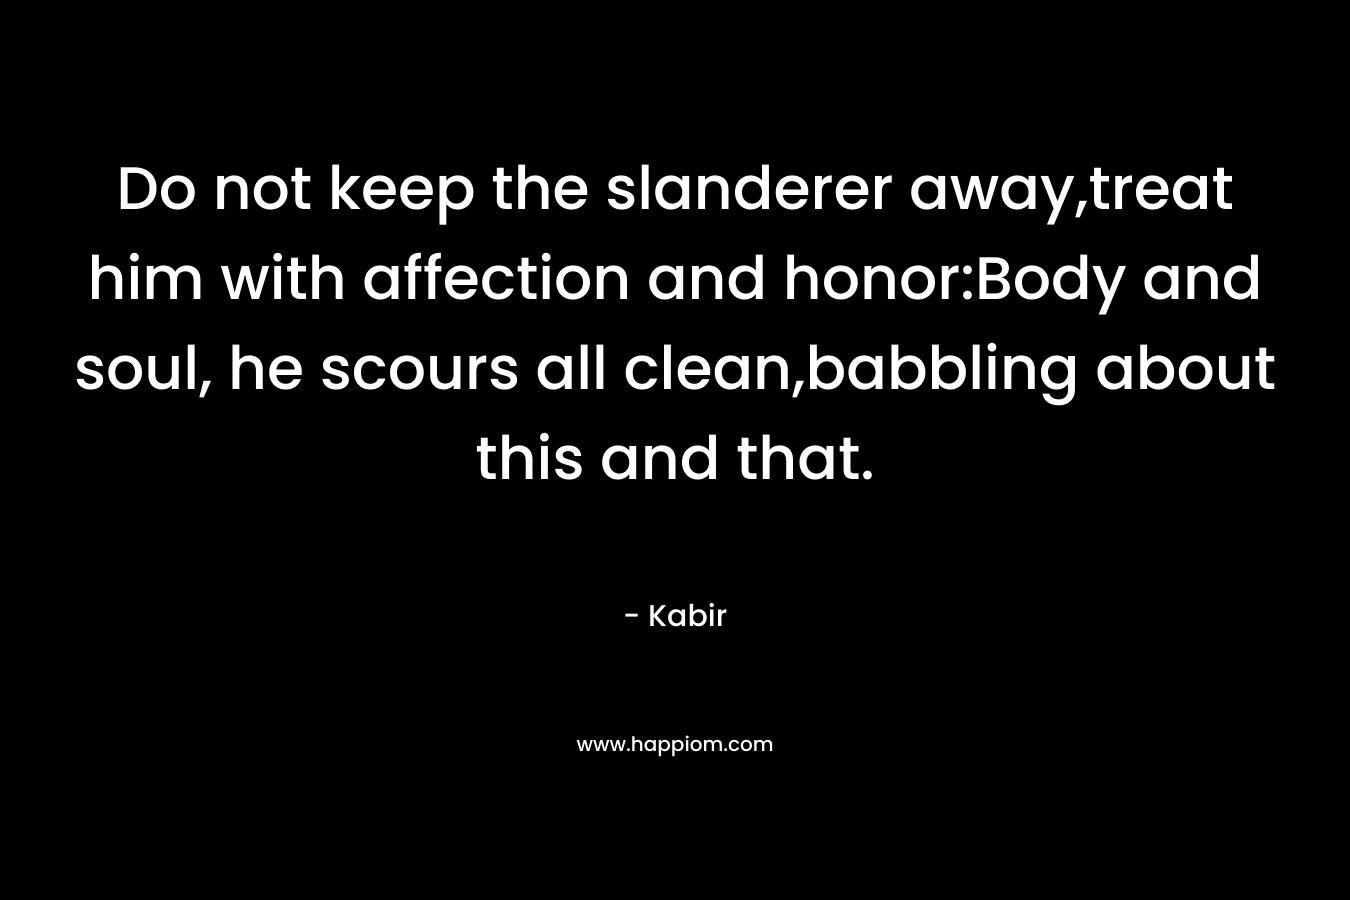 Do not keep the slanderer away,treat him with affection and honor:Body and soul, he scours all clean,babbling about this and that.